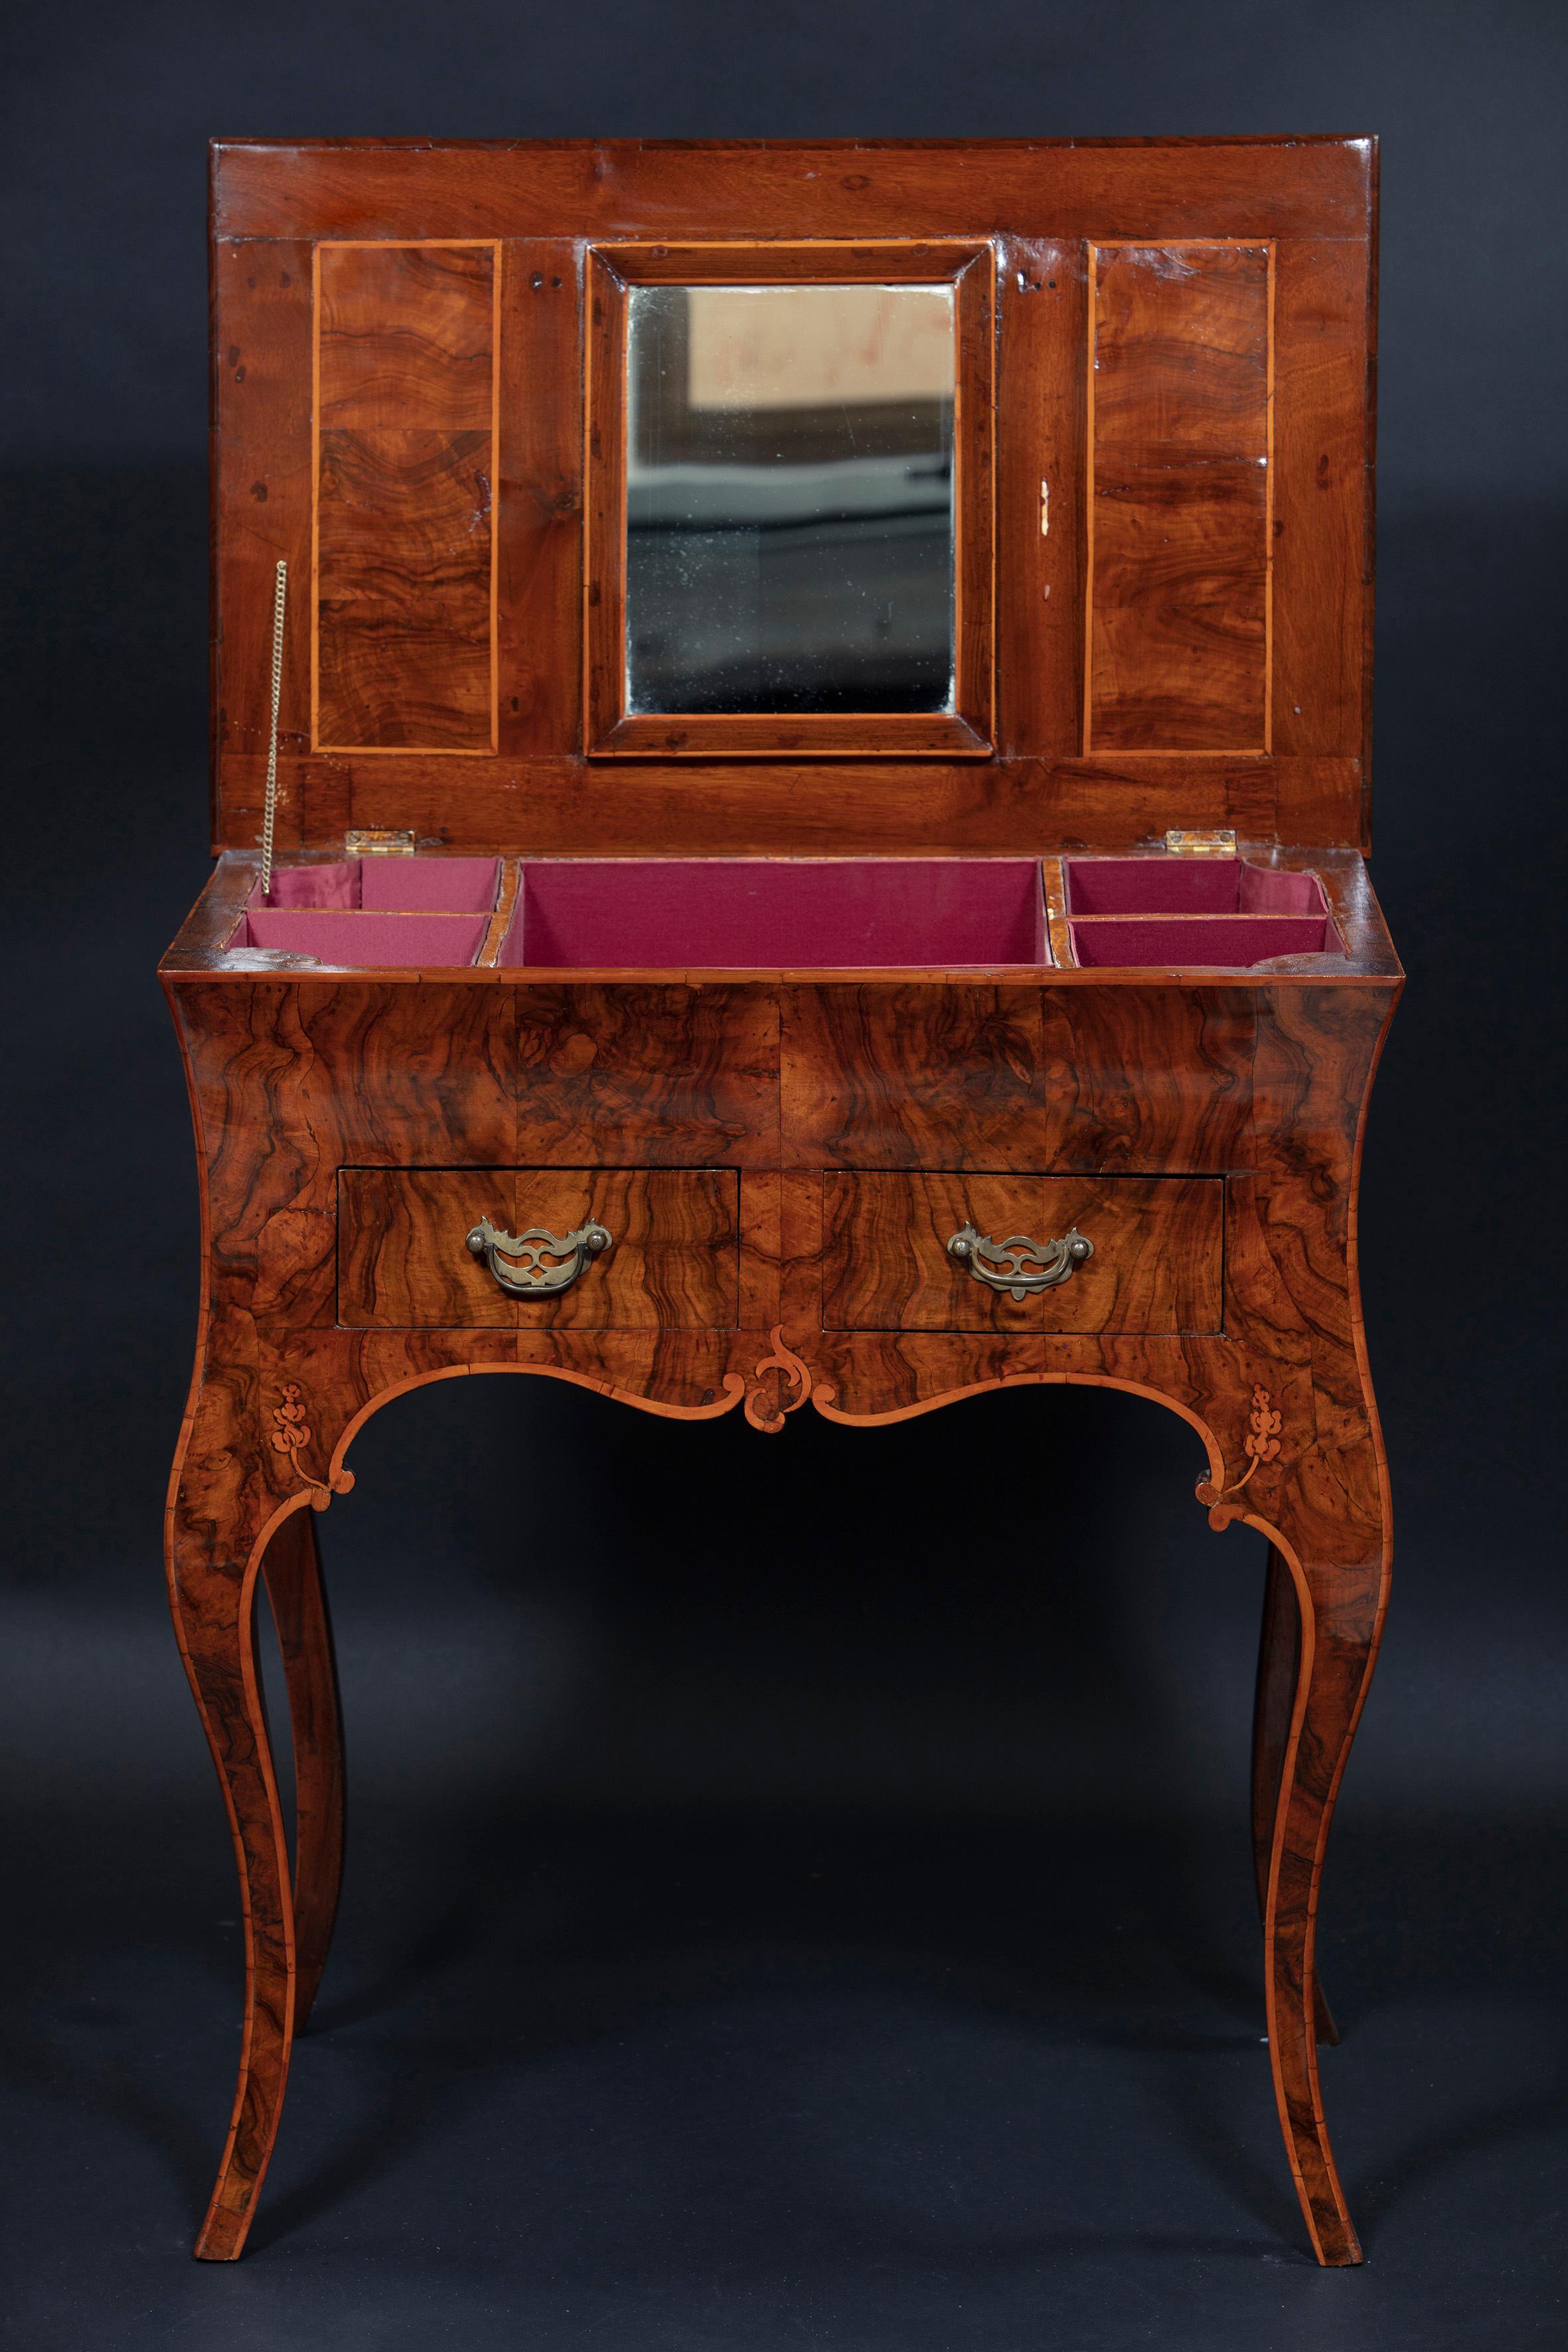 Louis XV toilet, centerpiece, moved on four sides, rooted in olive wood and panelled and filleted, moved legs, two small drawers, compartments stored under the top, Lombardy (Italy), 18th-century period, measures 70x43 cm, height 77 cm.
The cabinet